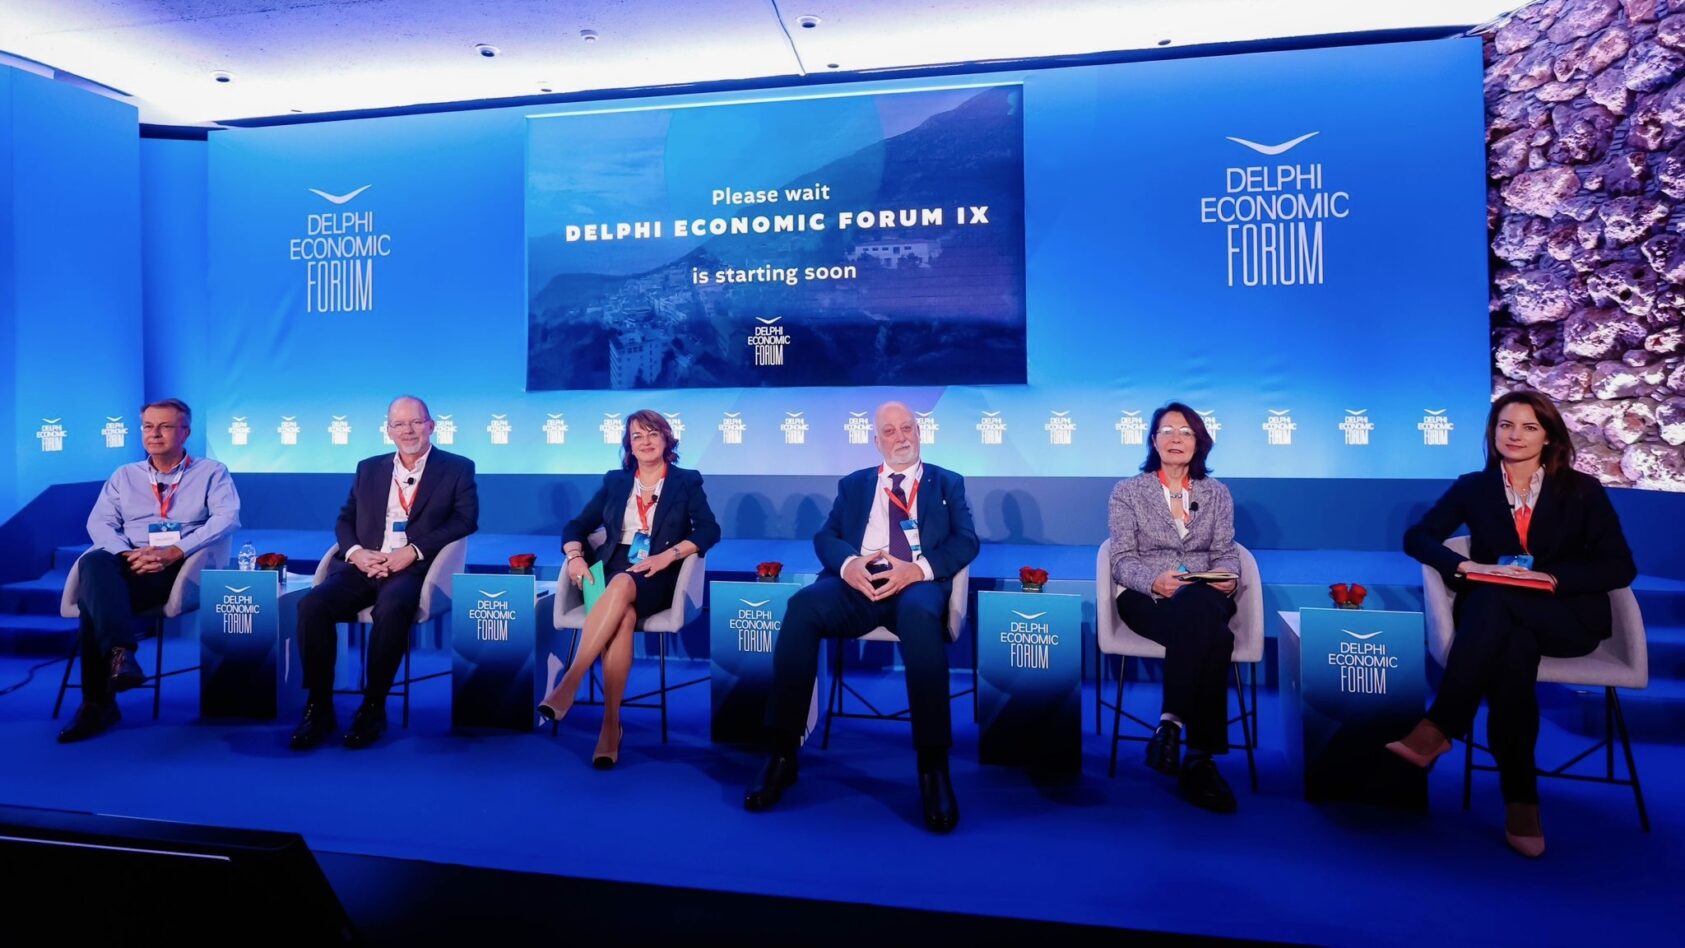 , The Session 'Rising Tides, Rising Threats: Safeguarding Our Oceans in a Warming World' was chaired by Cheryl Nowak (on the right) and had following panelists (from the left): Kostas Lagouvardos, Lars Ebbesson,  Elisabeth Lipiatou, Hercules Haralambides and Maria Damanaki., Ebbesson, , 